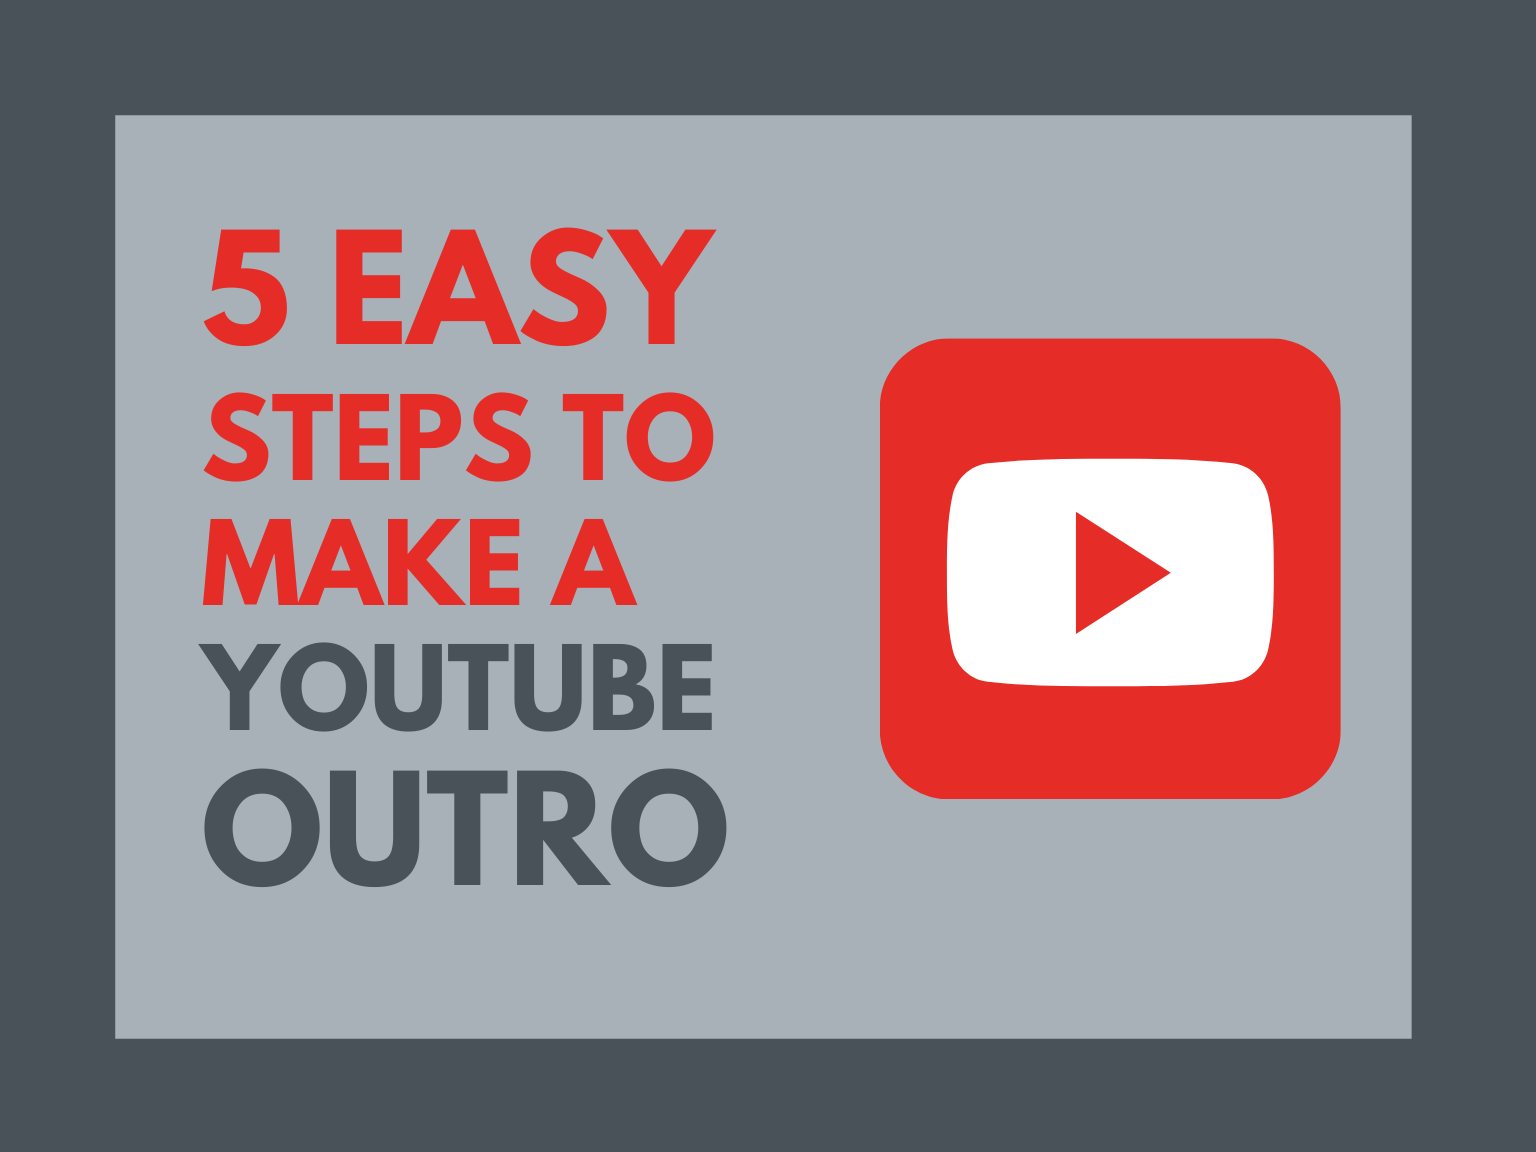 Xxx Video Little Big Panic - 5 Easy Steps to Make a YouTube Outro | The TechSmith Blog